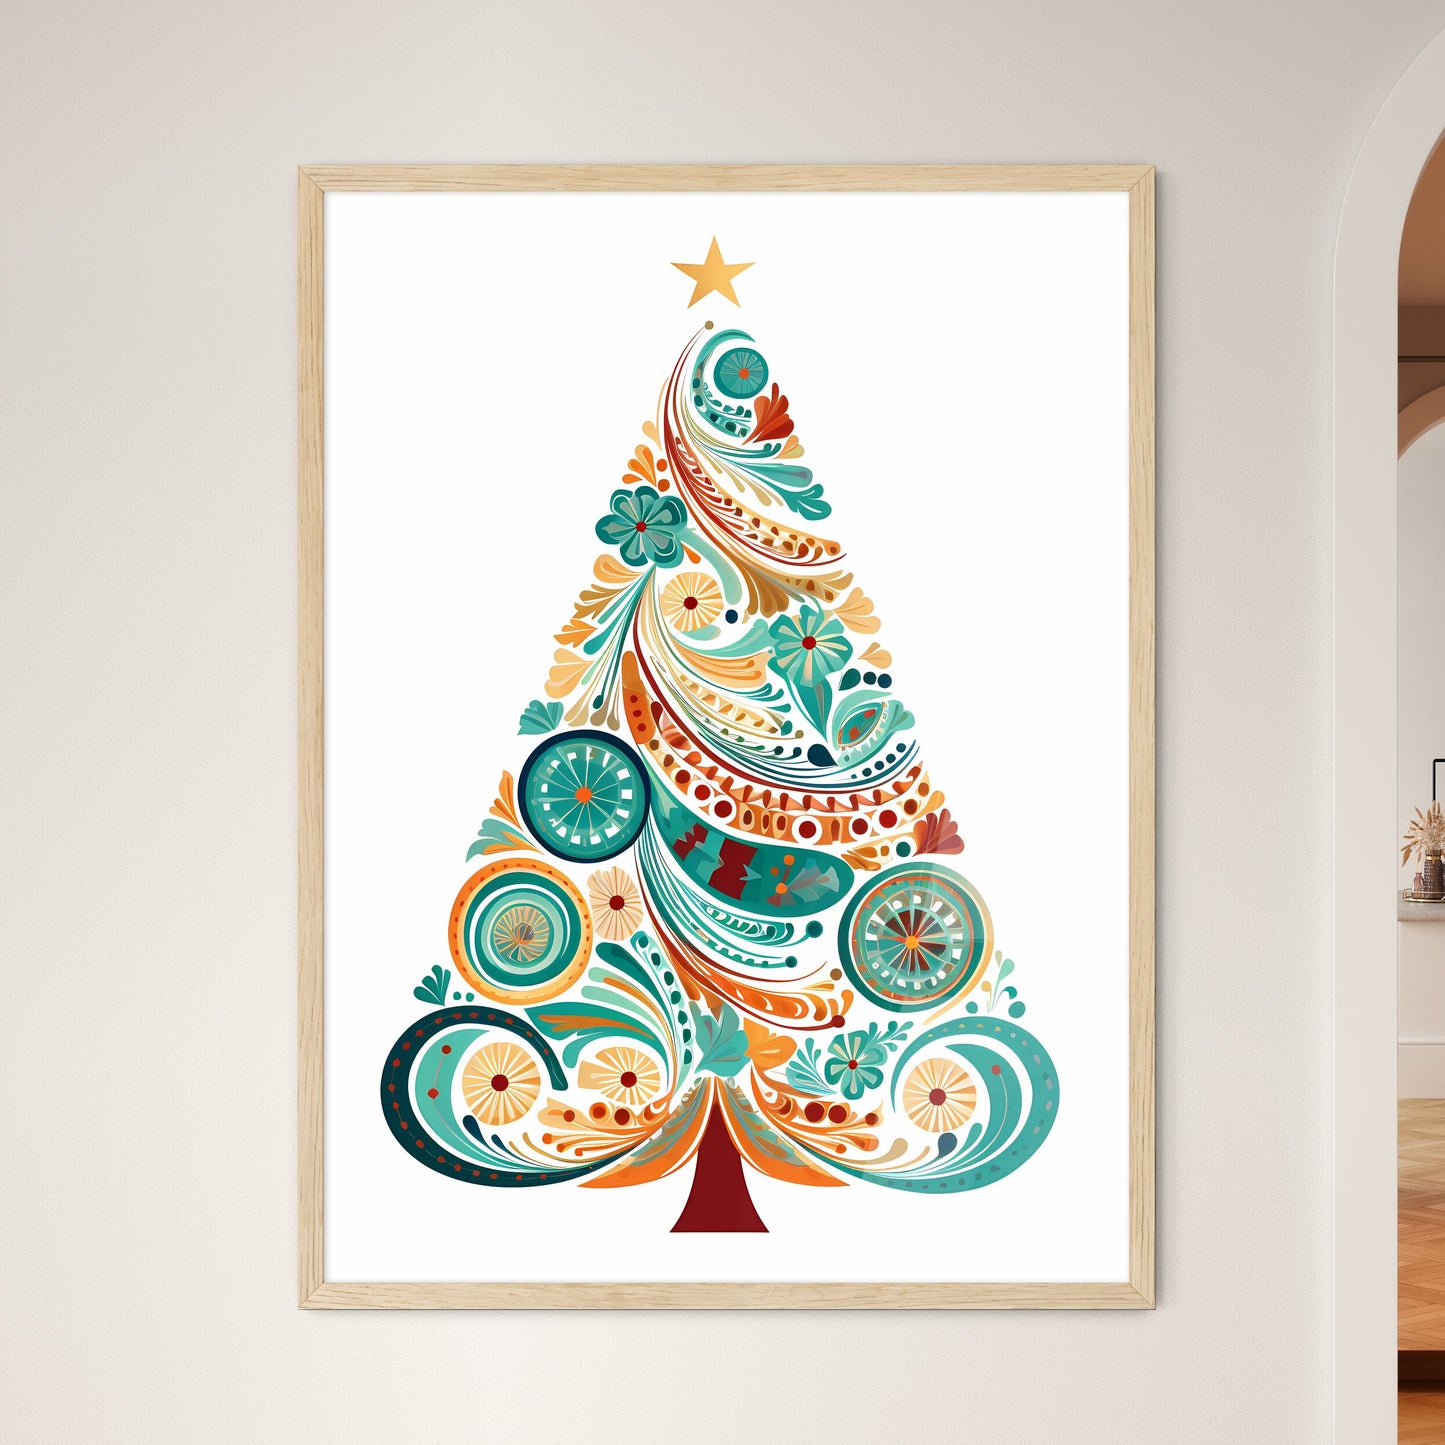 Colorful Tree With Swirls And Flowers Art Print Default Title